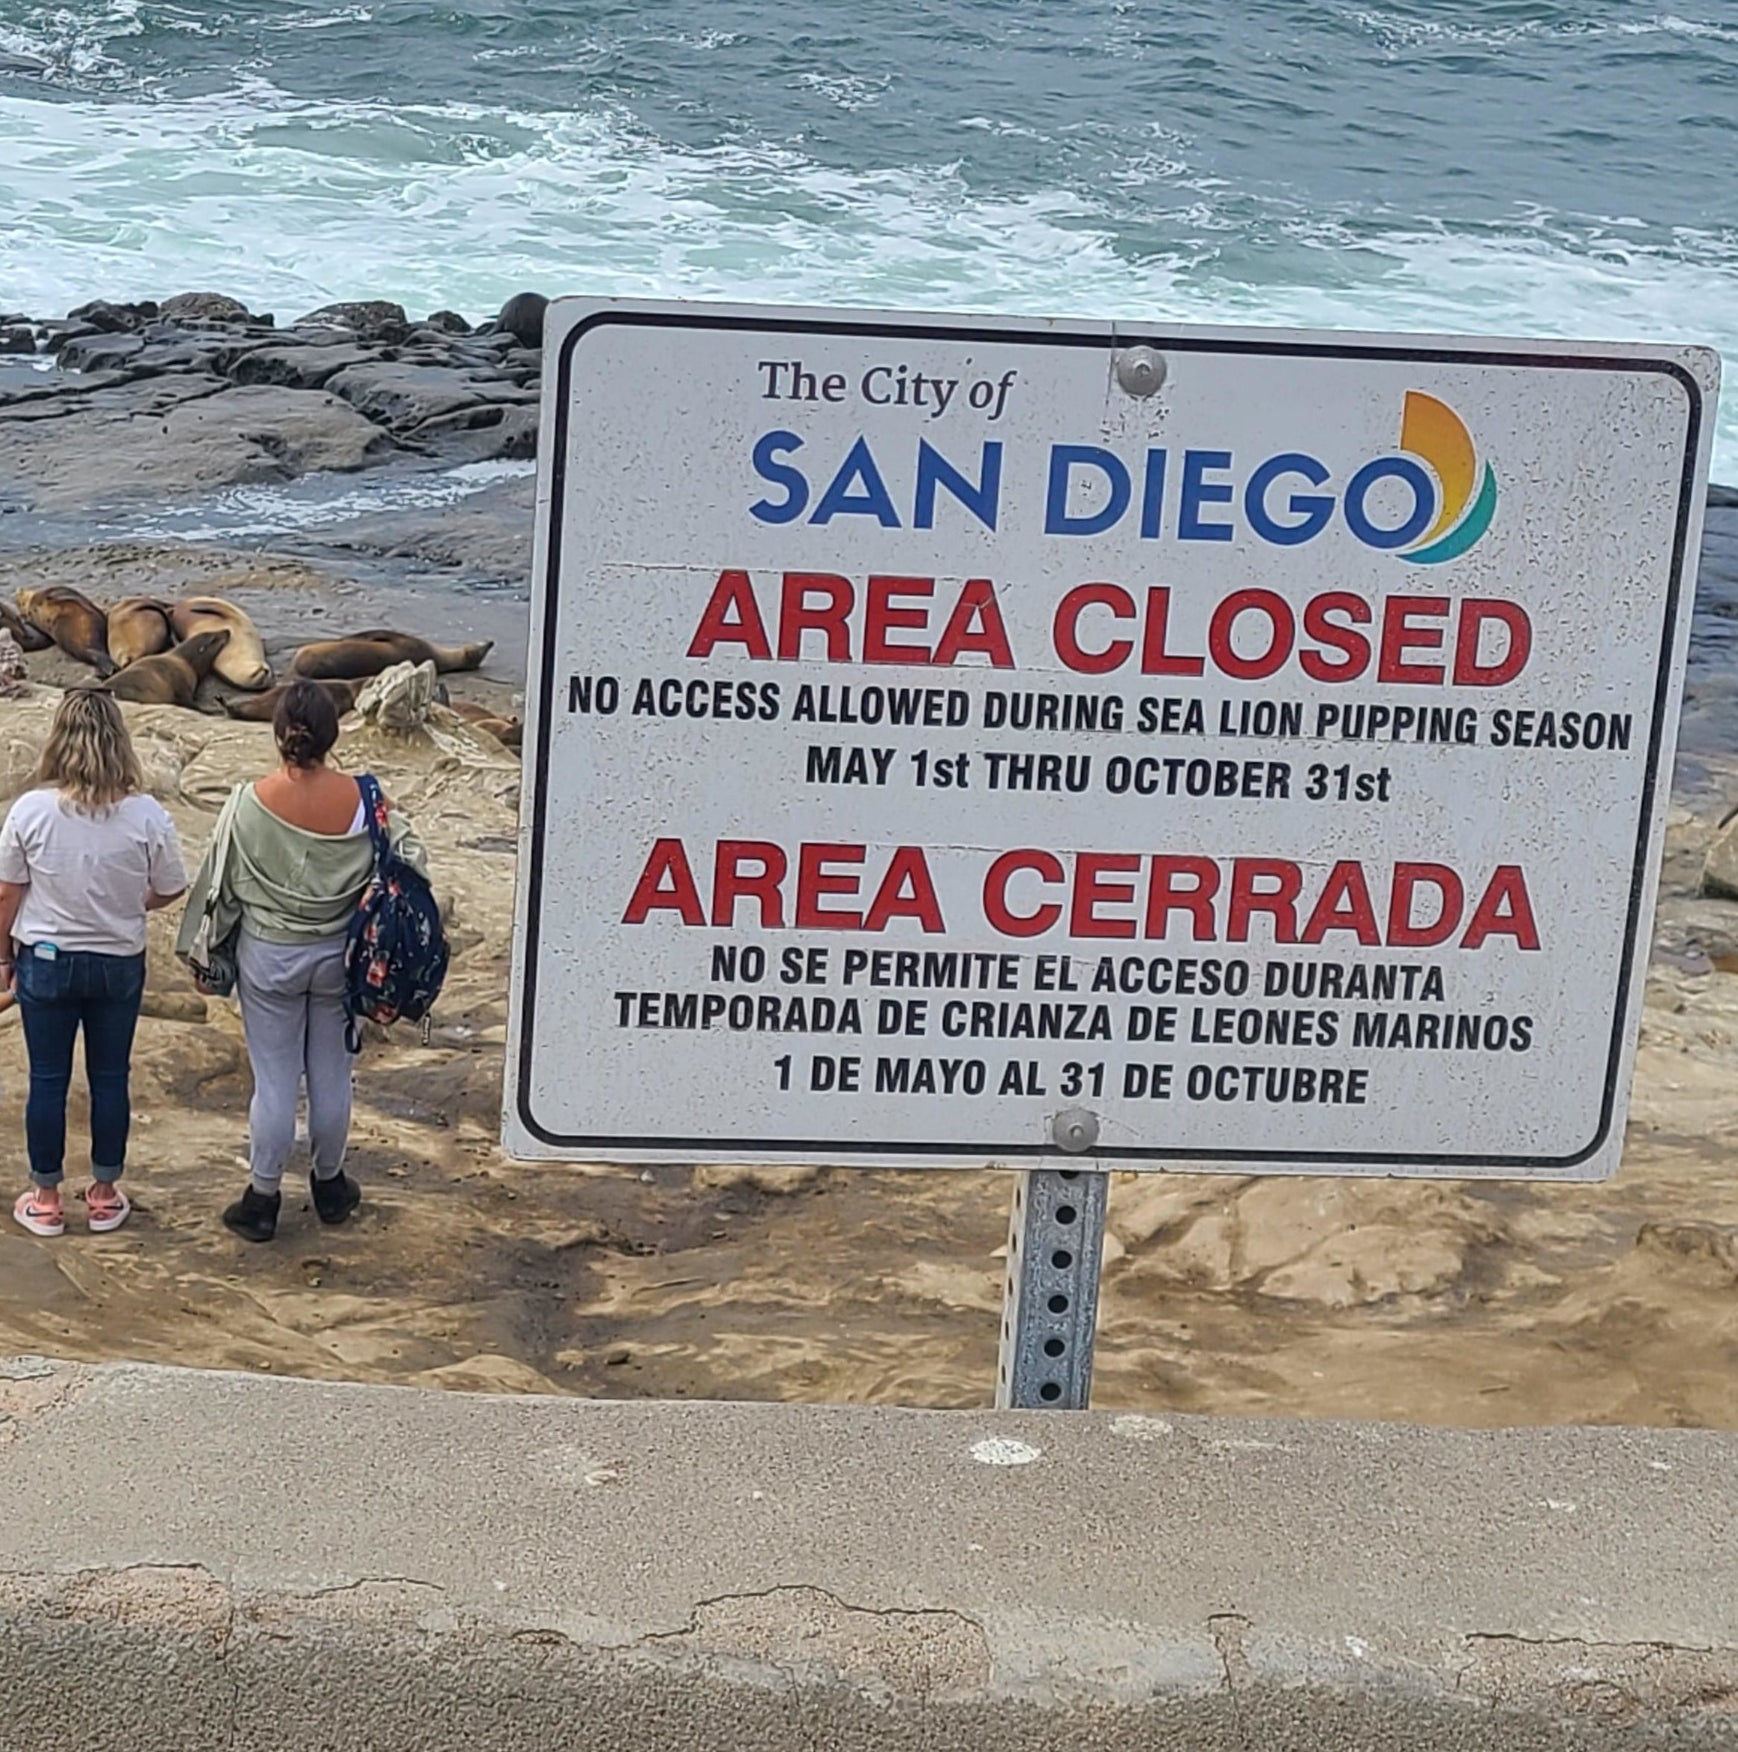 A sign says the area is closed and no access allowed during sea lion pupping season, but people can be seen behind the sign and very close to the sea lions